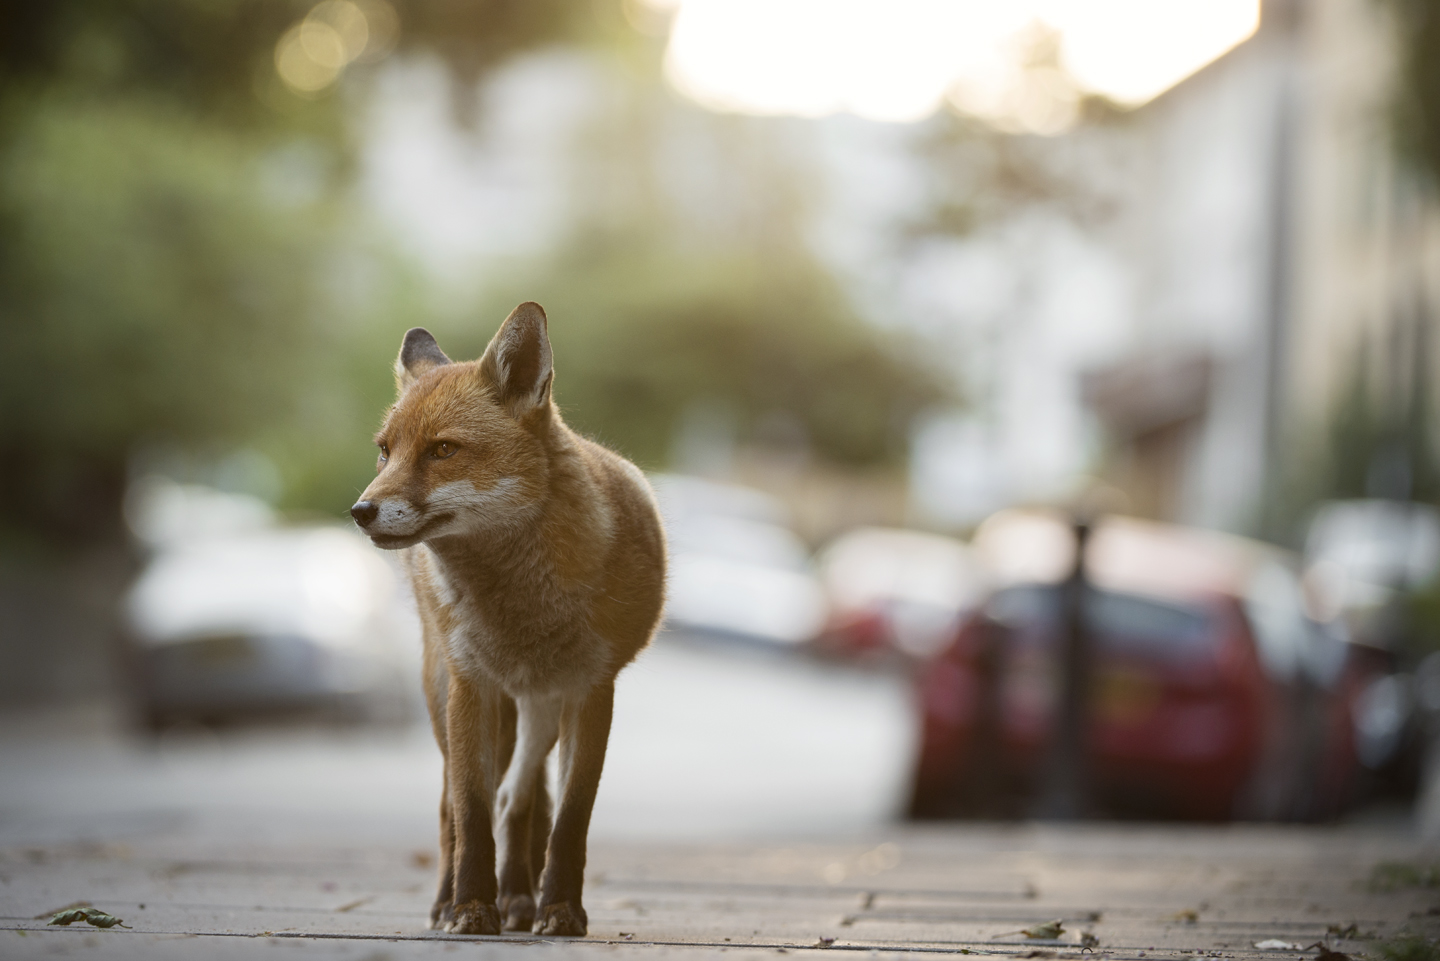  Dog foxes patrol their territories in the early morning, before the commuters head out for the day 